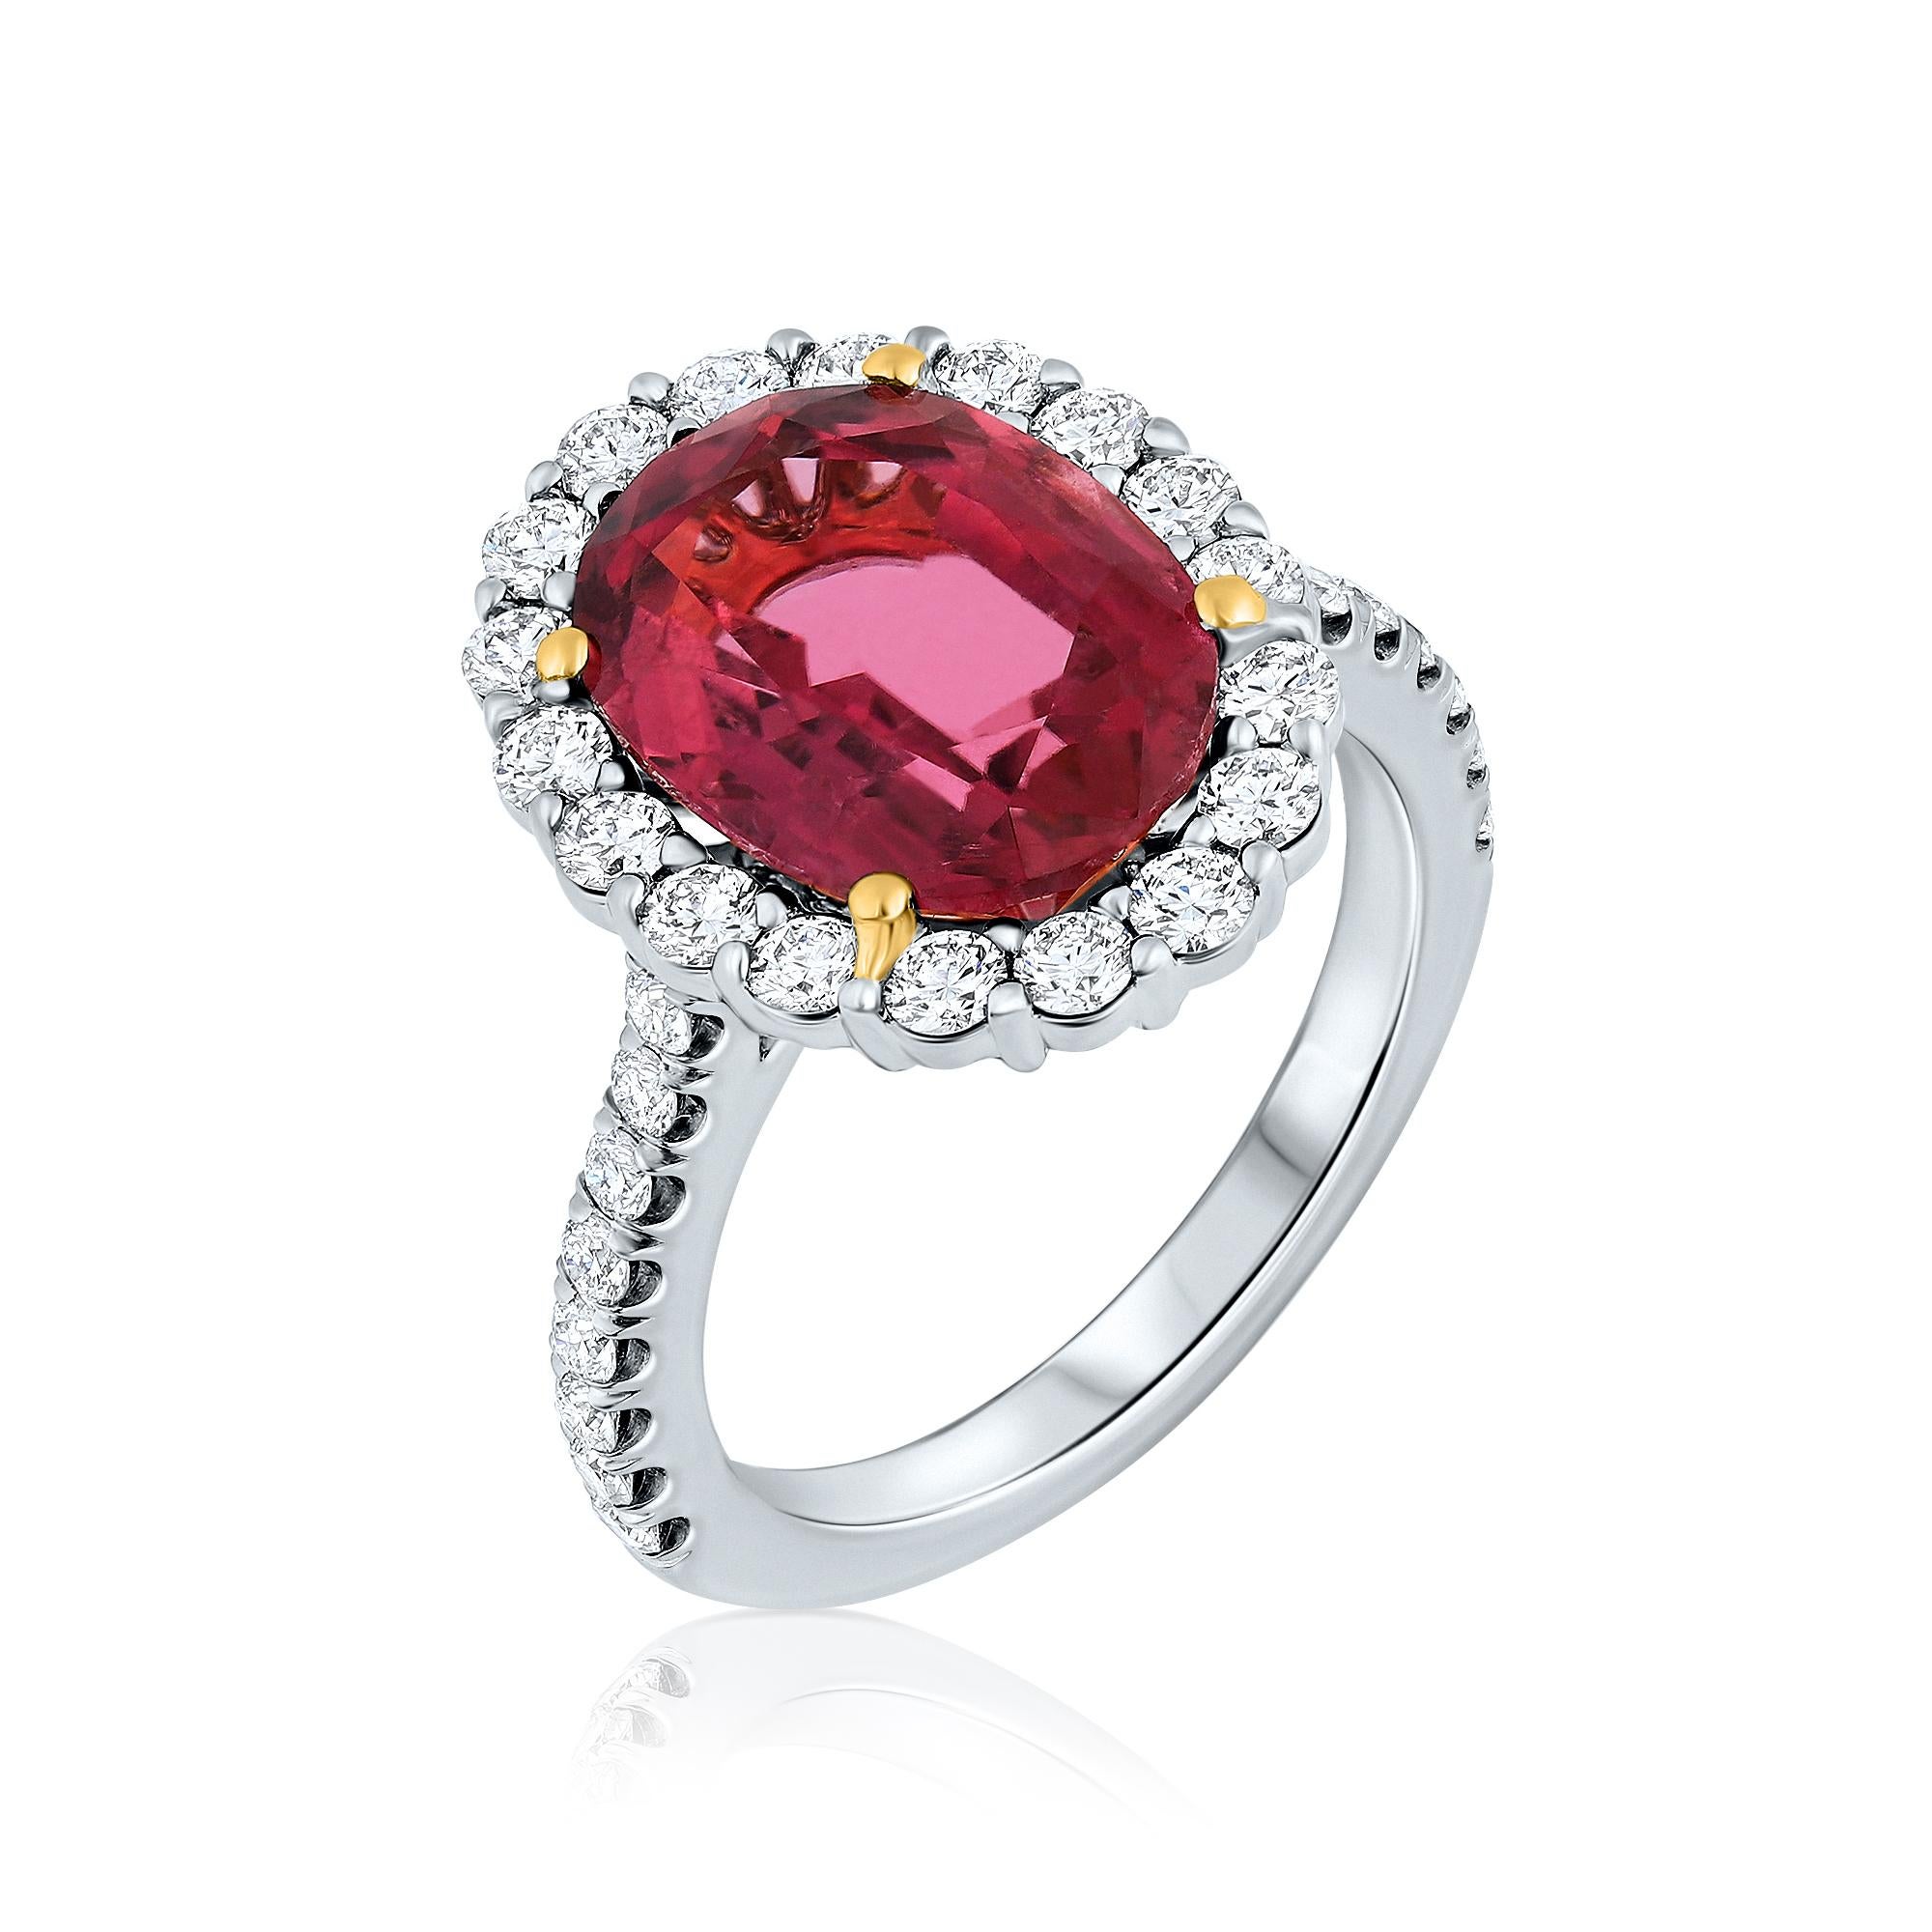 Baroque 5.93 Carat Red Tourmaline & Diamond Halo Cocktail Ring, set in 18K Gold. For Sale